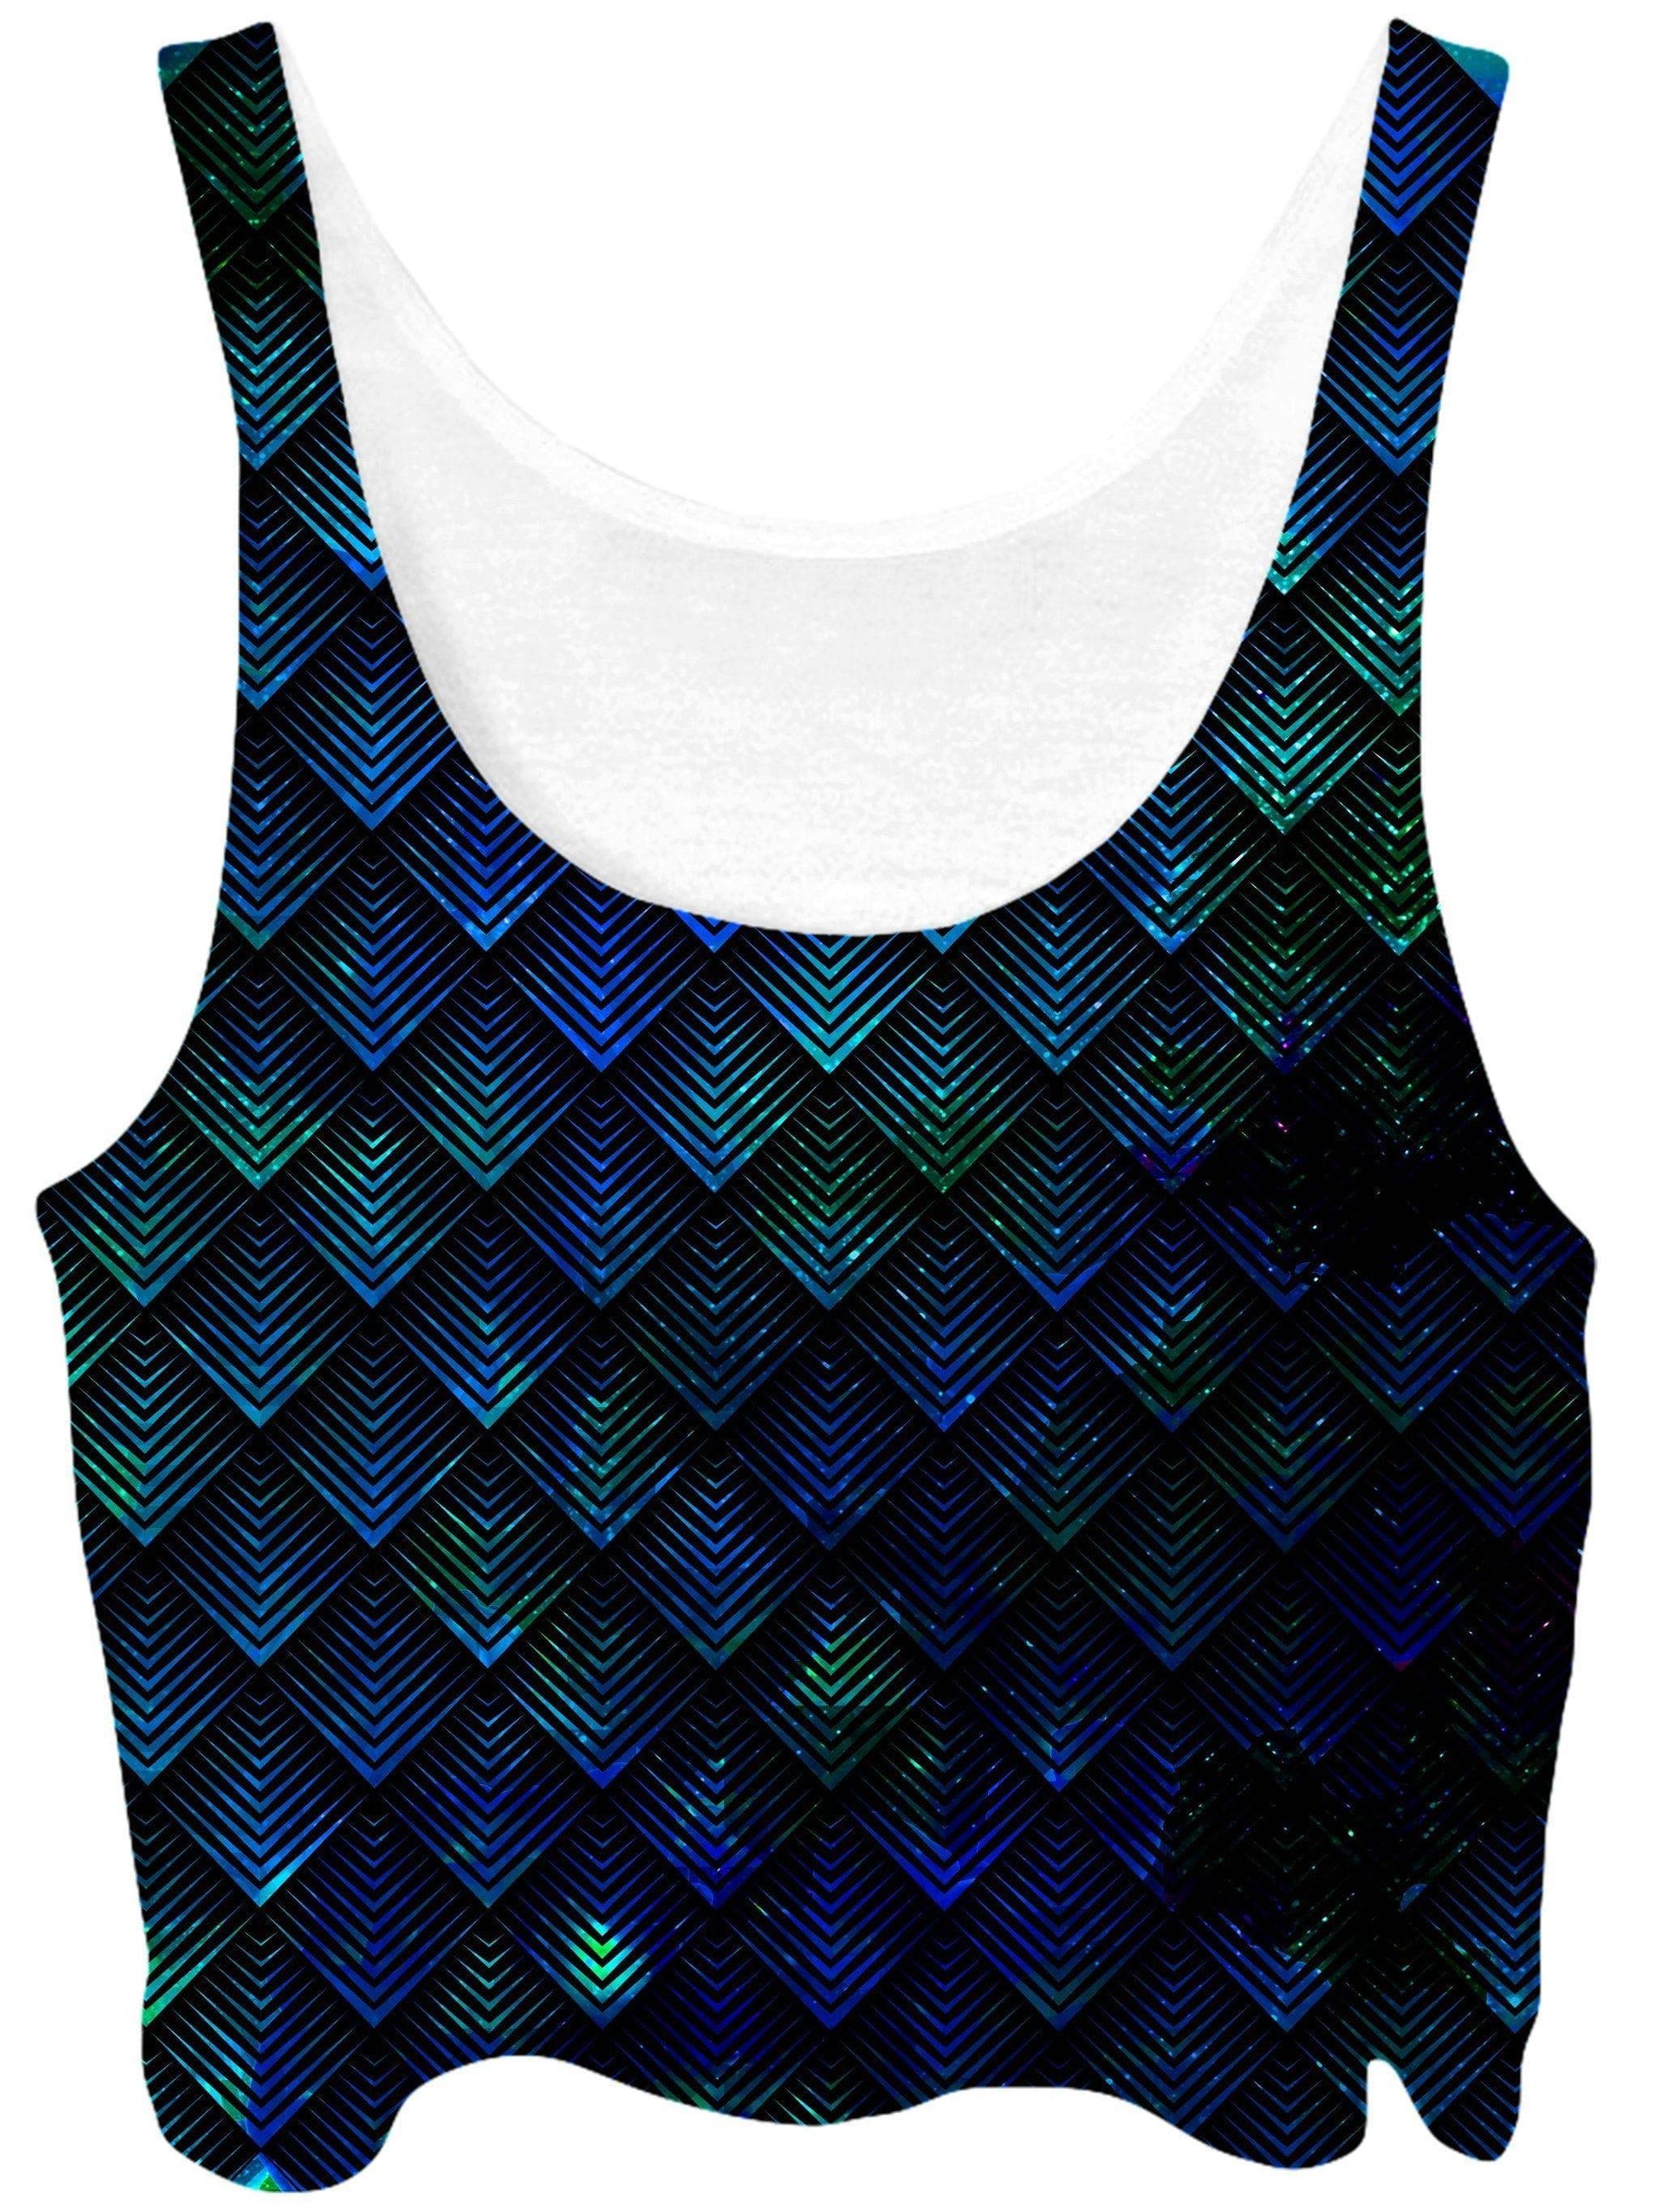 Galactic Dragon Scale Teal Crop Top (Ready To Ship), Noctum X Truth, | iEDM